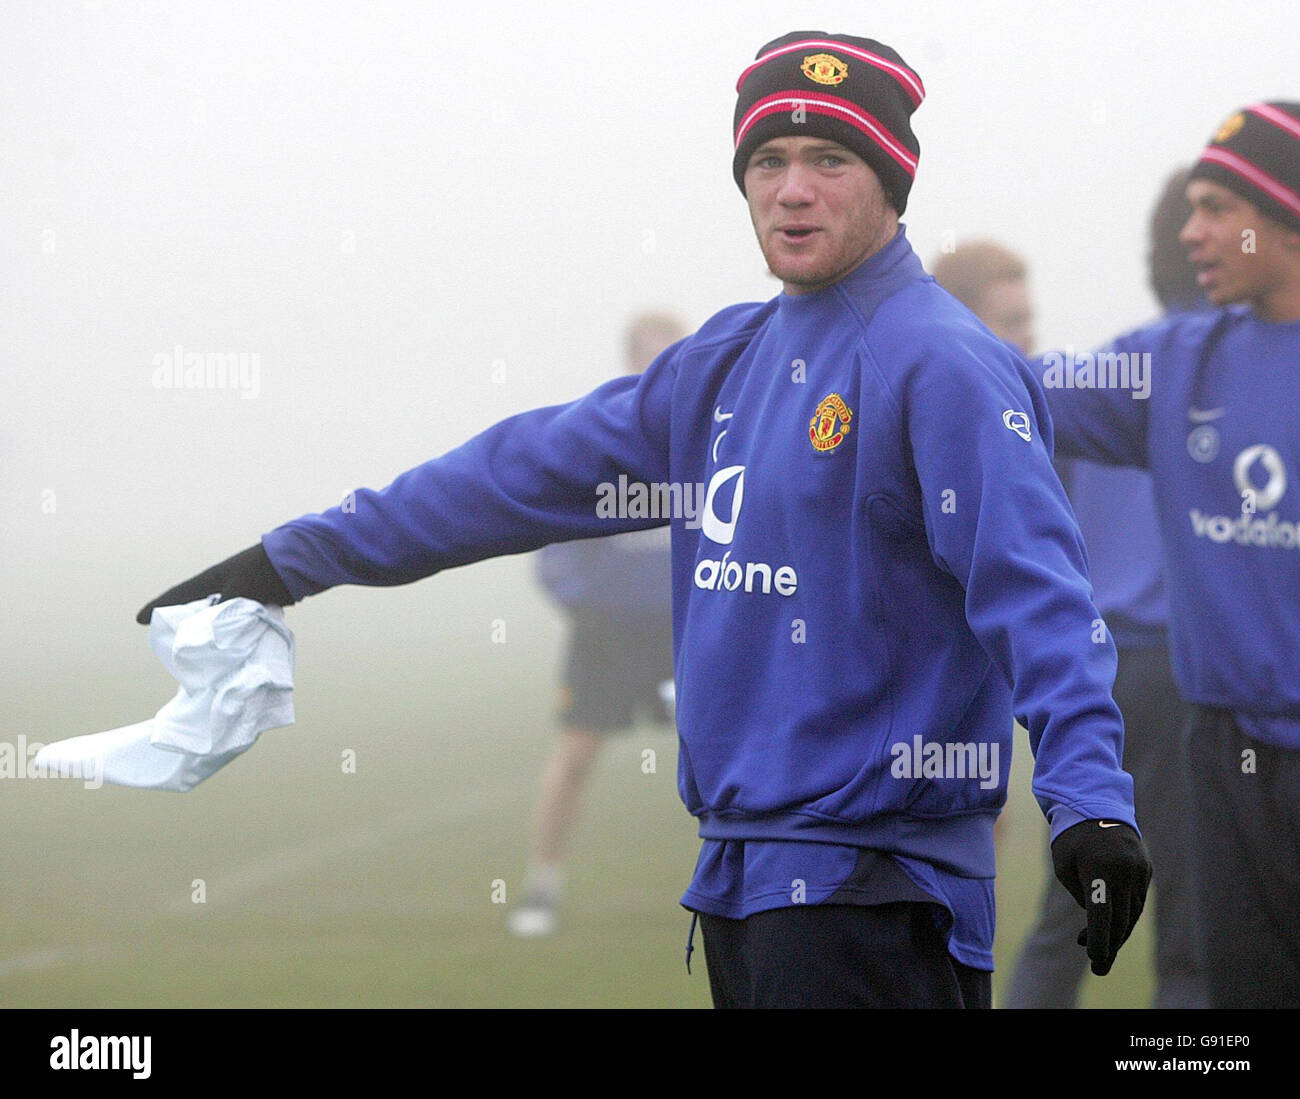 Manchester United's Wayne Rooney during a training session at Carrington, Manchester, Monday November 21, 2005. Manchester United play Villarreal in a UEFA Champions League match at Old Trafford tomorrow. PRESS ASSOCIATION Photo. Photo credit should read: Martin Rickett/PA Stock Photo